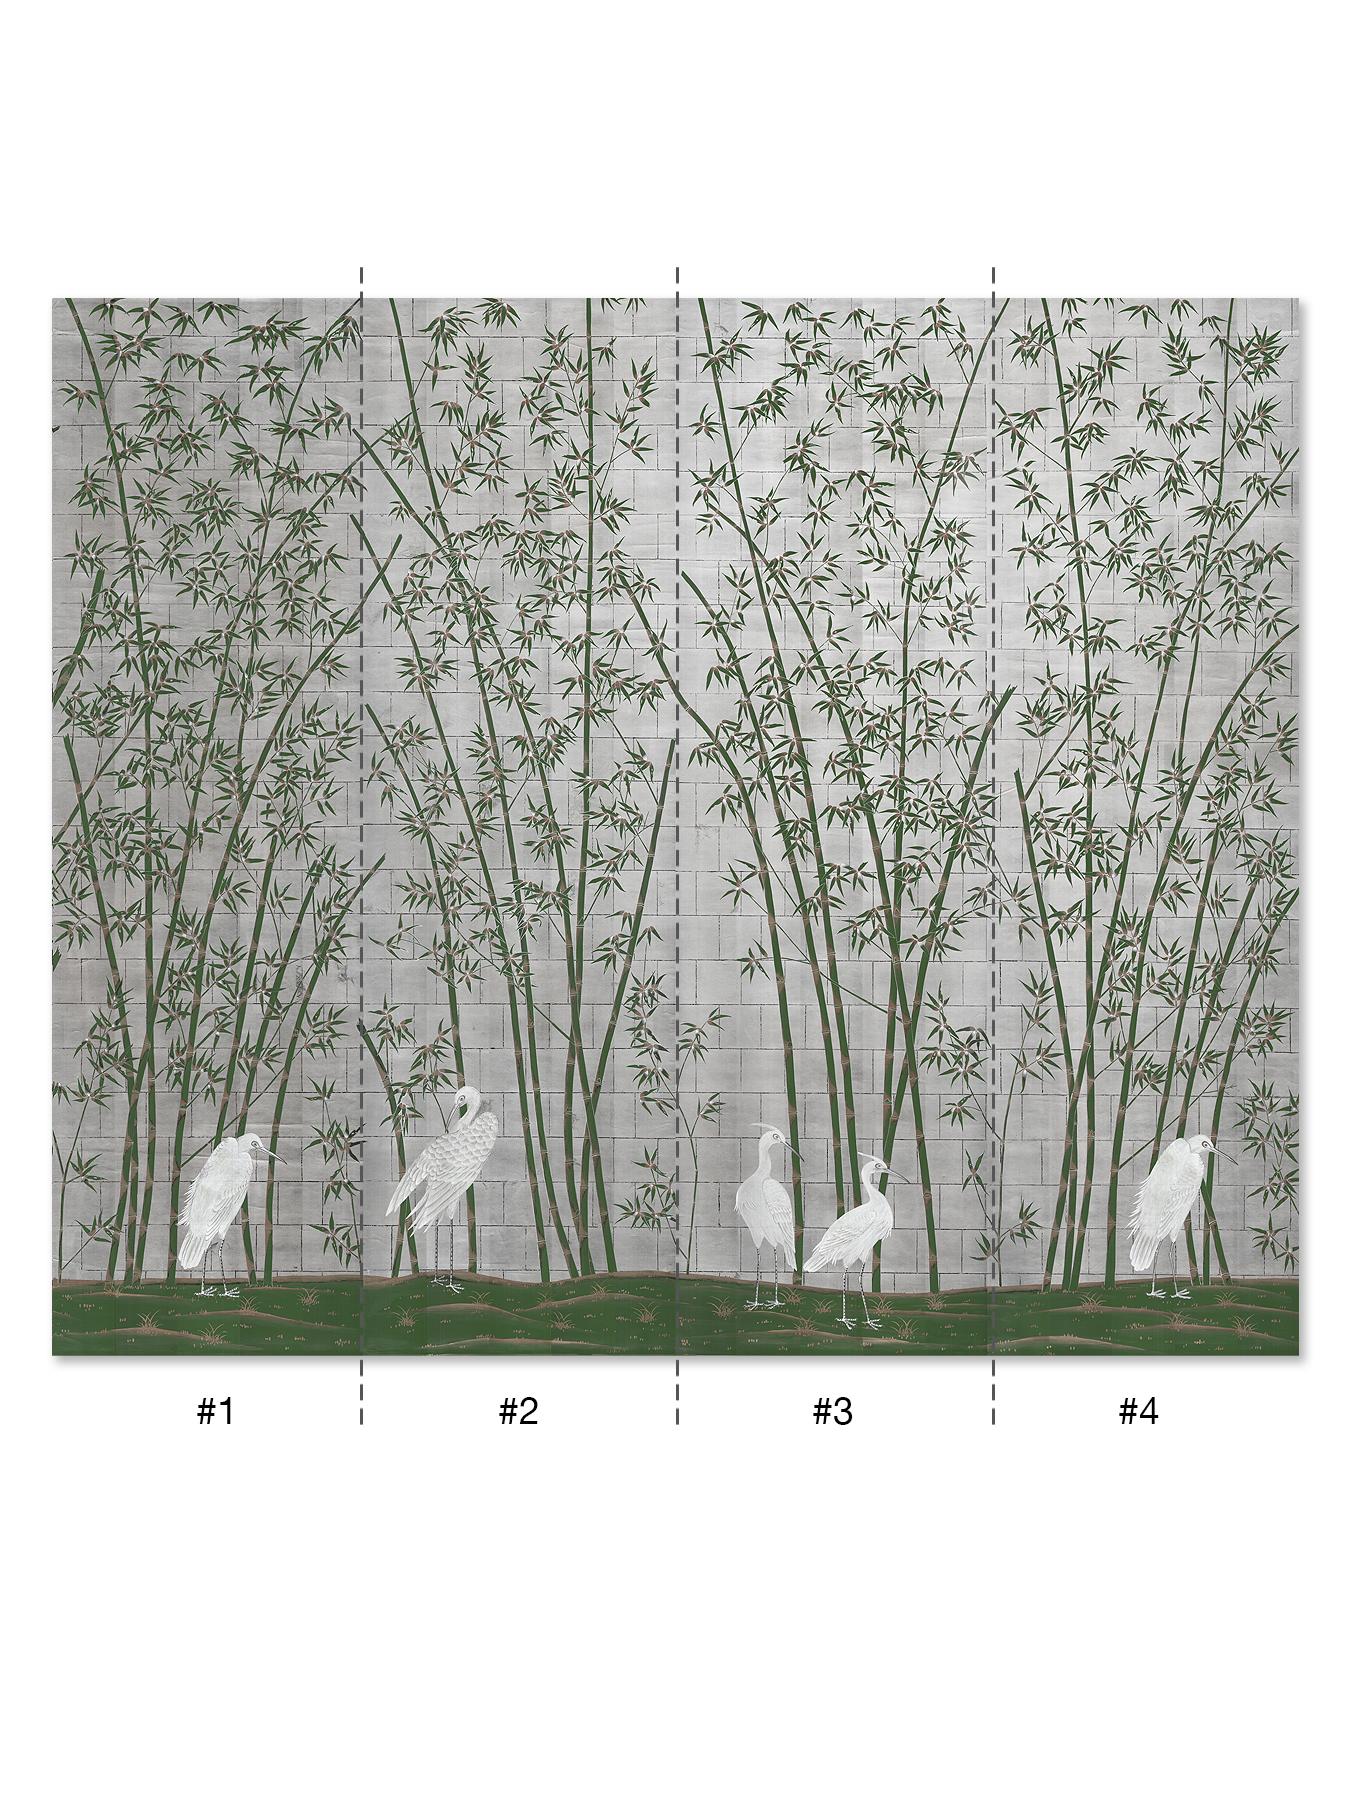 Bamboo and Cranes is an exotic mural of bamboo trees with a group of majestic white cranes below. This mural is hand painted on silver metal leaf paper. The bamboo trees are delicately wrought in a deep green with white lines and gold highlights.